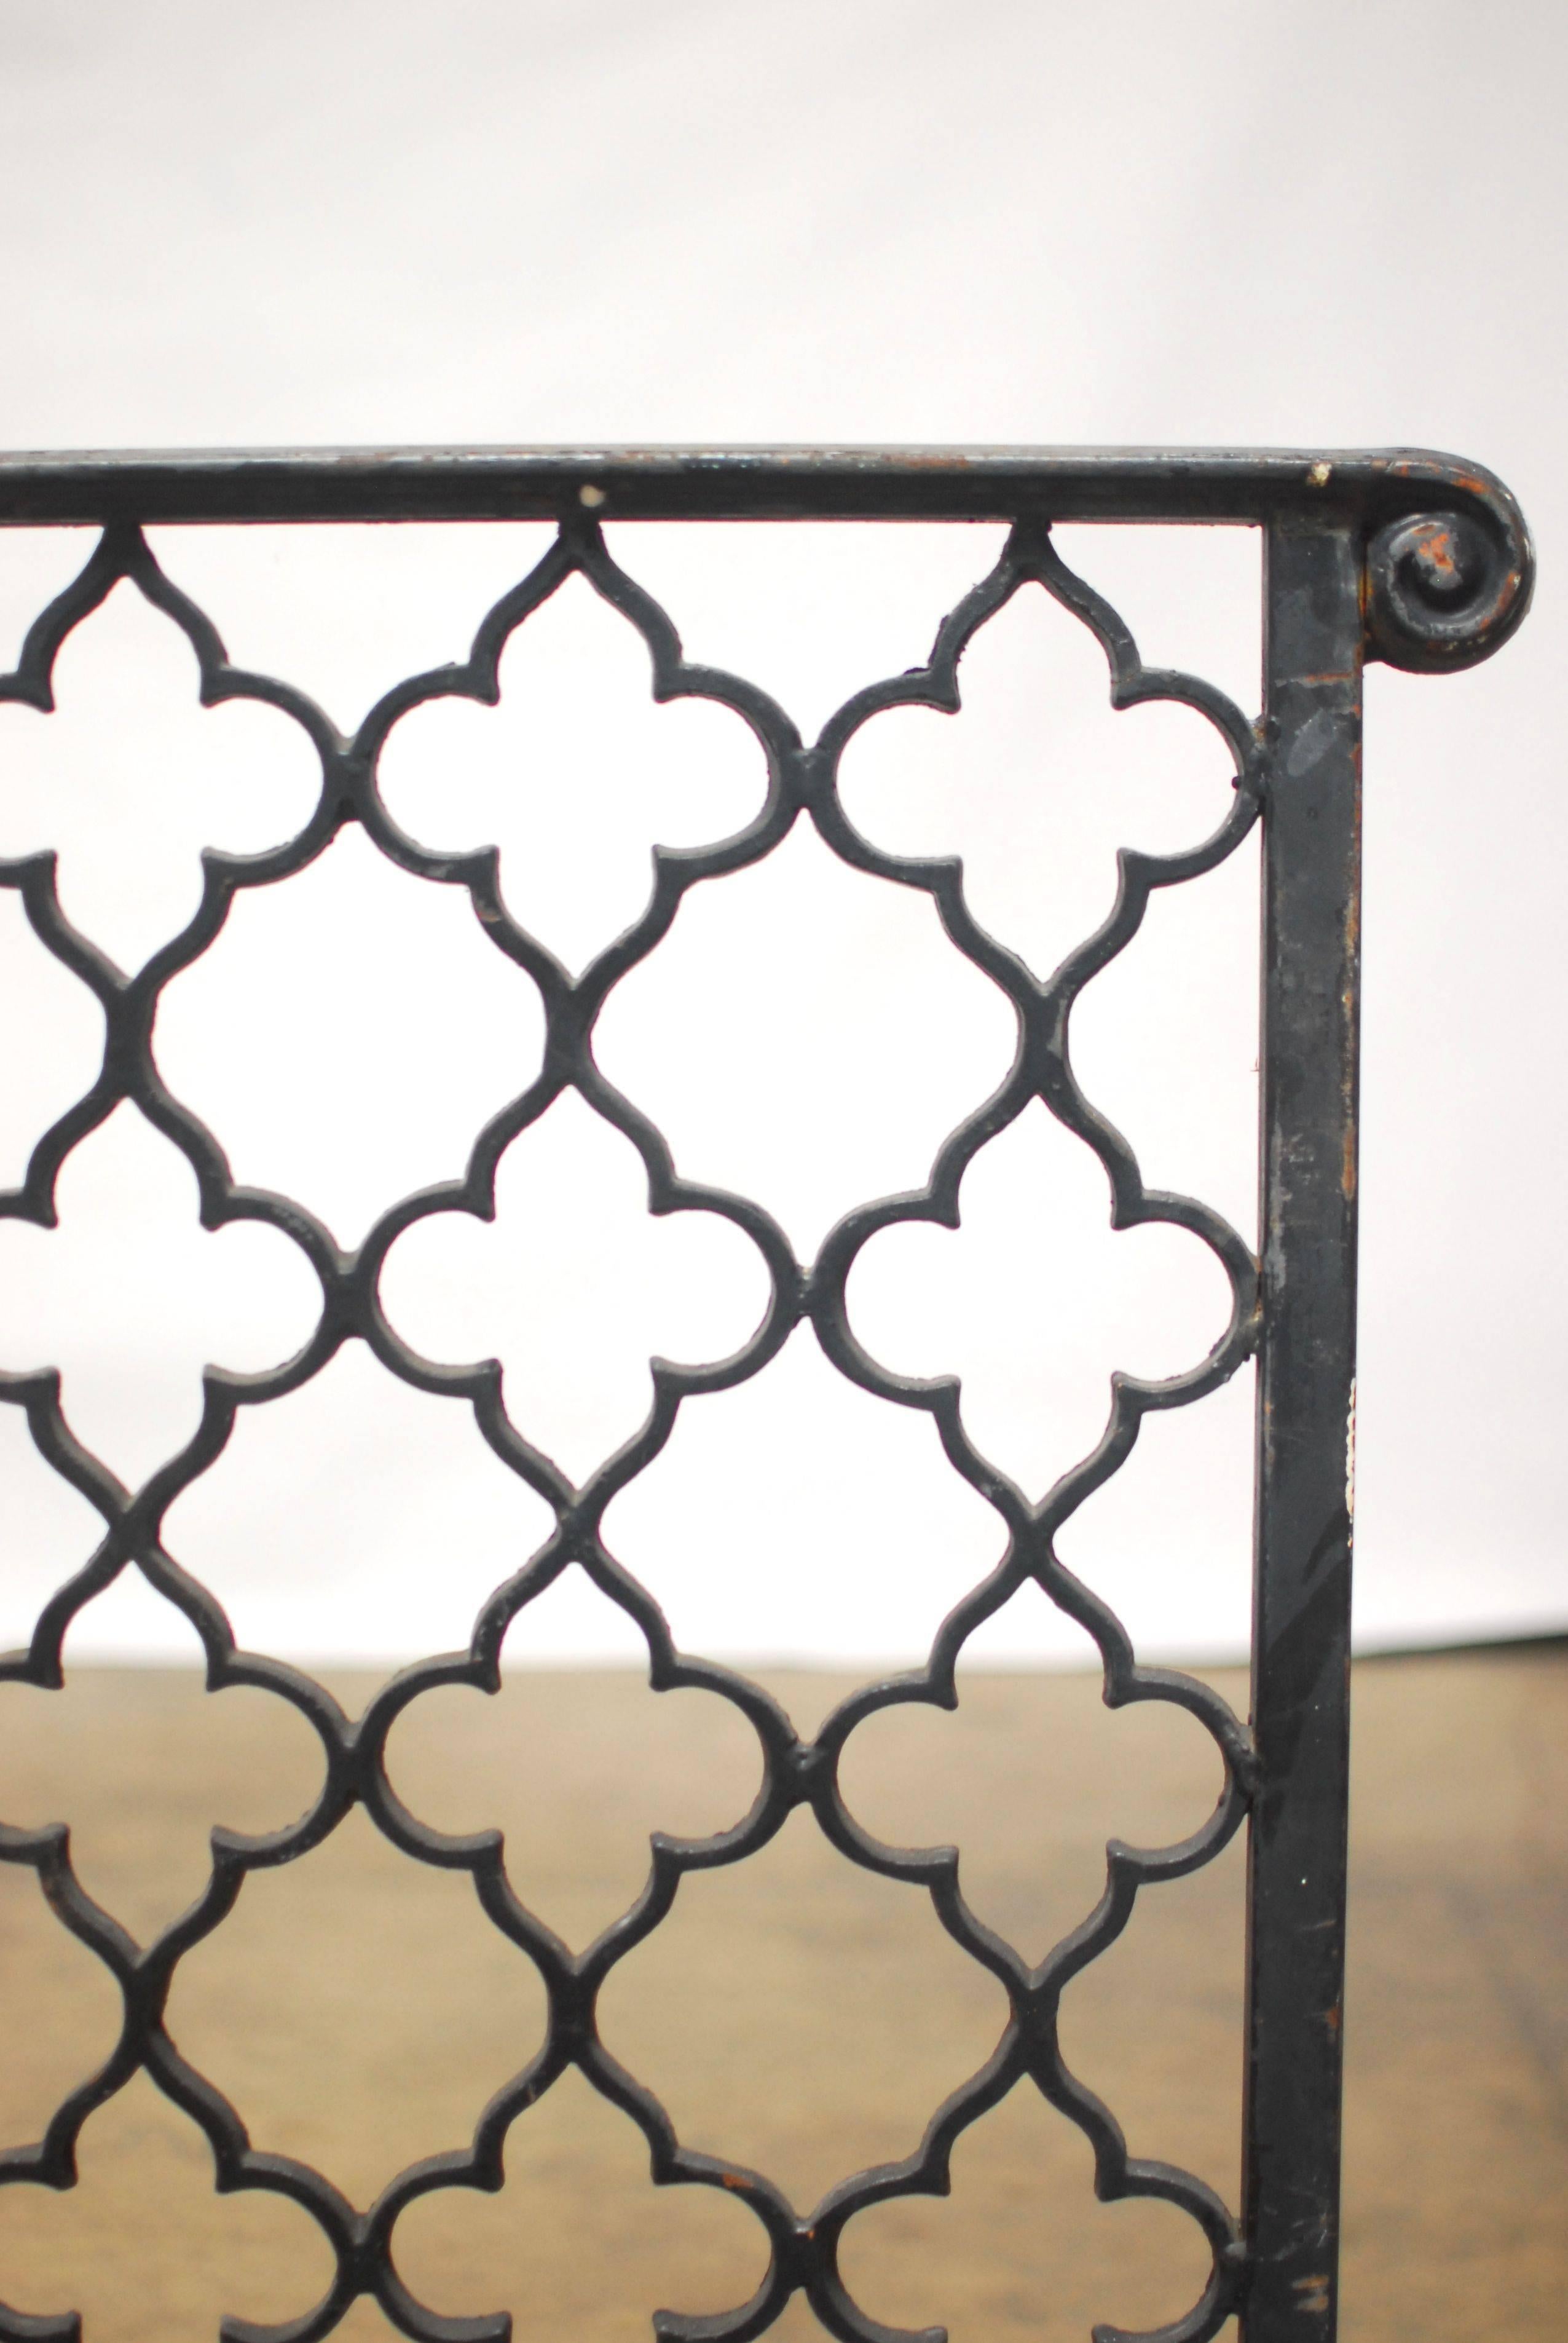 19th century French church altar railing made with a quatrefoil Gothic pattern. Constructed of wrought iron and divided into two sections topped with a thick scrolled hand railing. Beautiful pattern made in symmetrical fence sections. Would make an